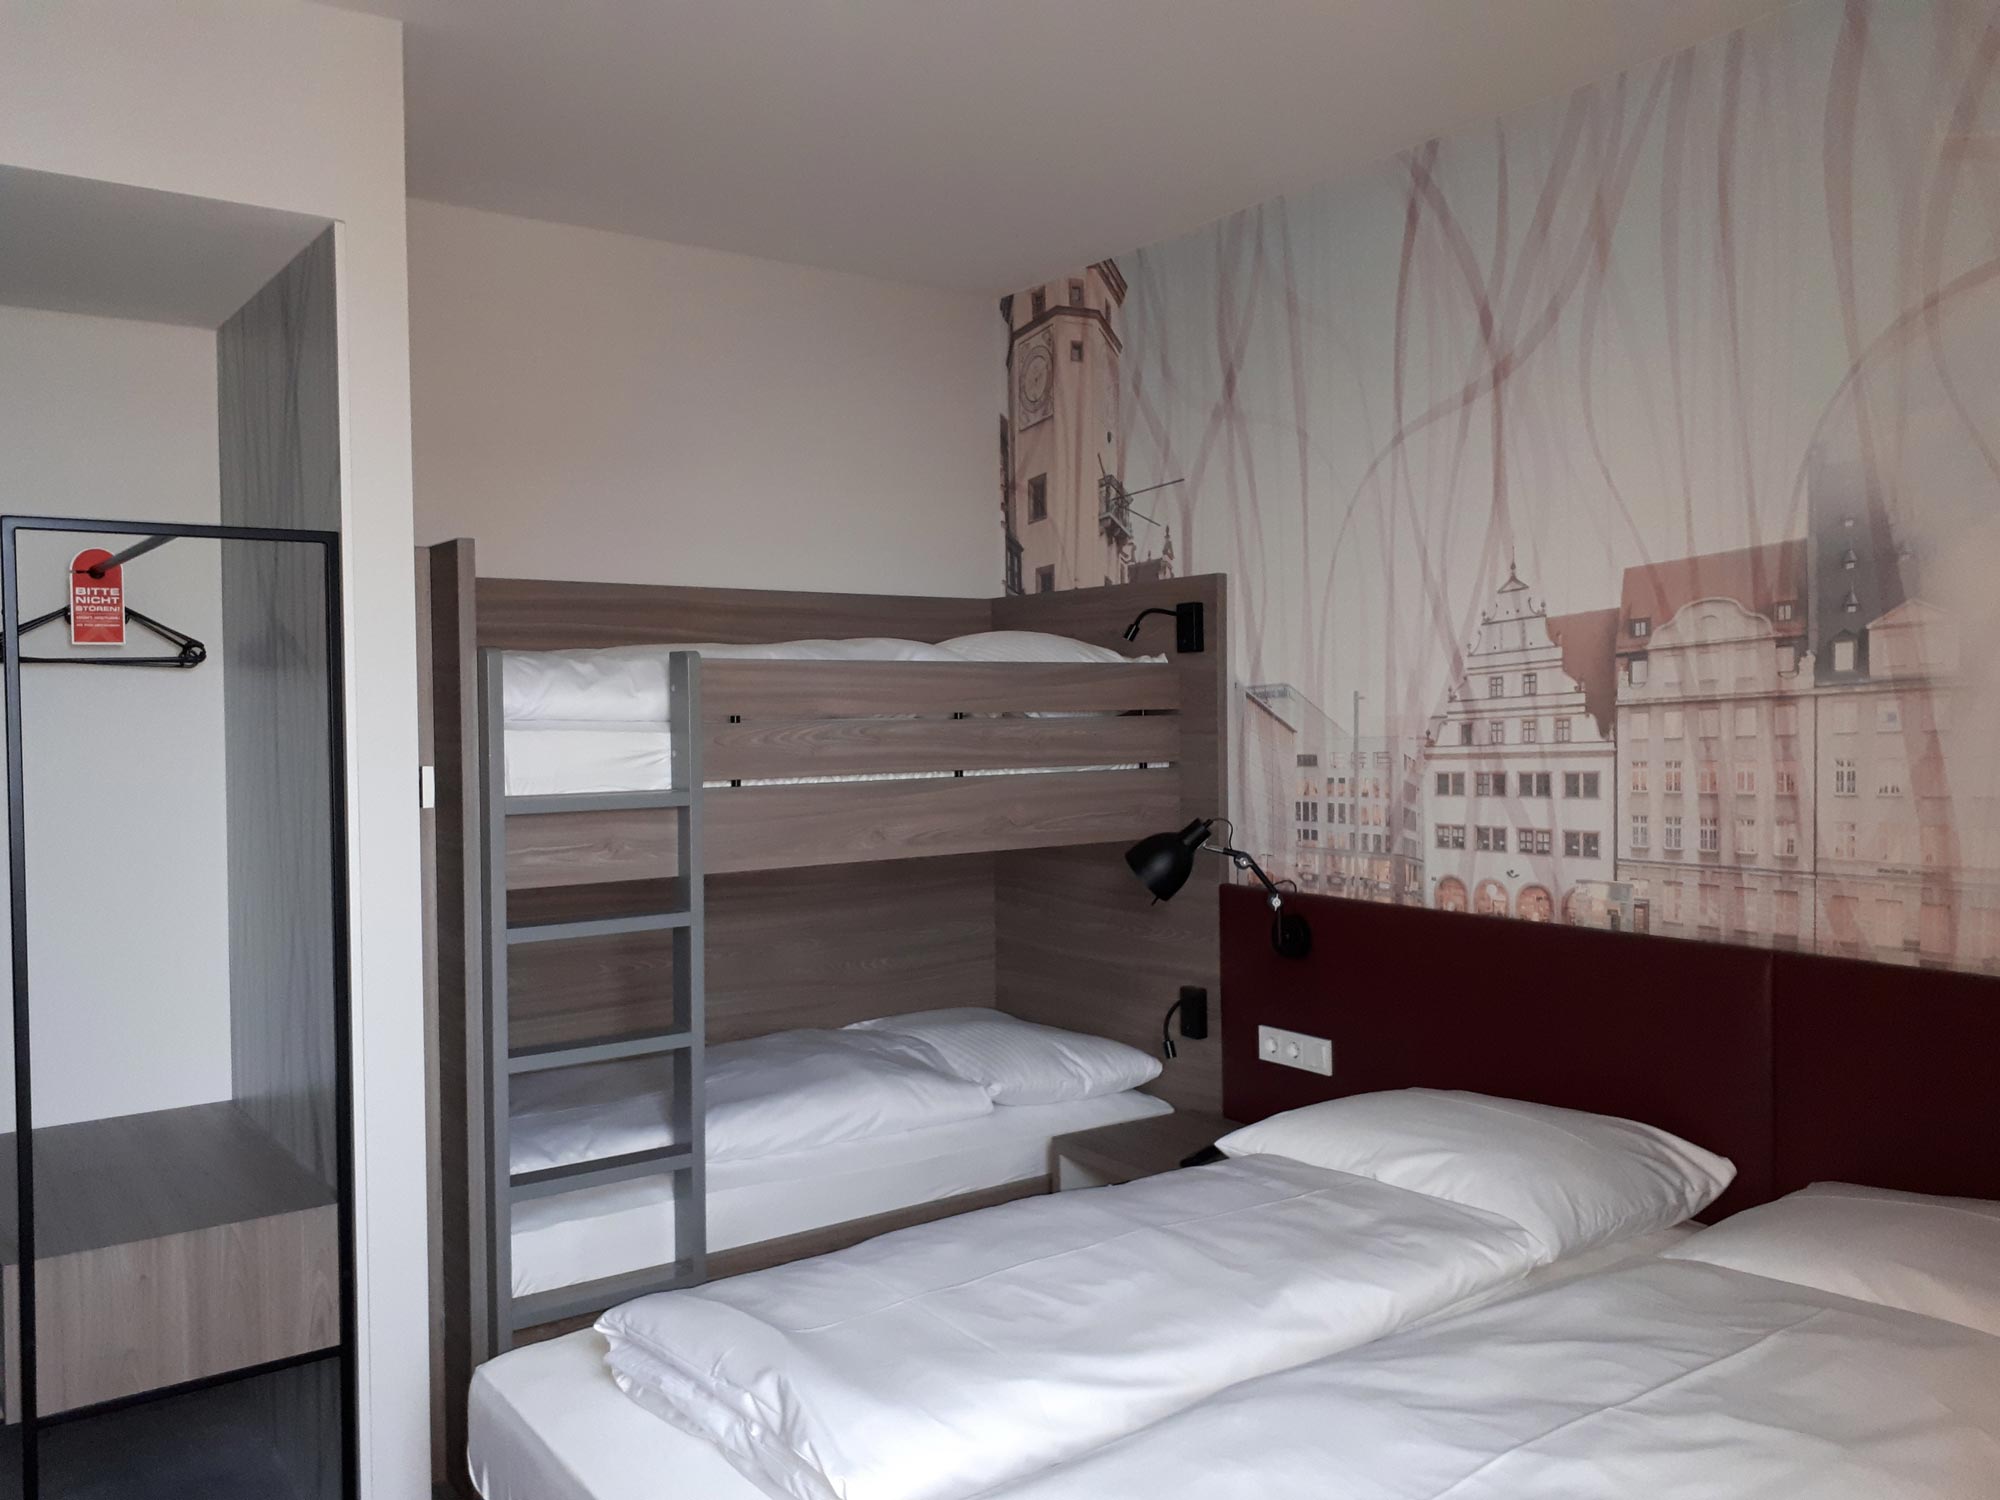 Rooms Family Room With Bunk Bed Leipzig Hotel 7 Days Premium